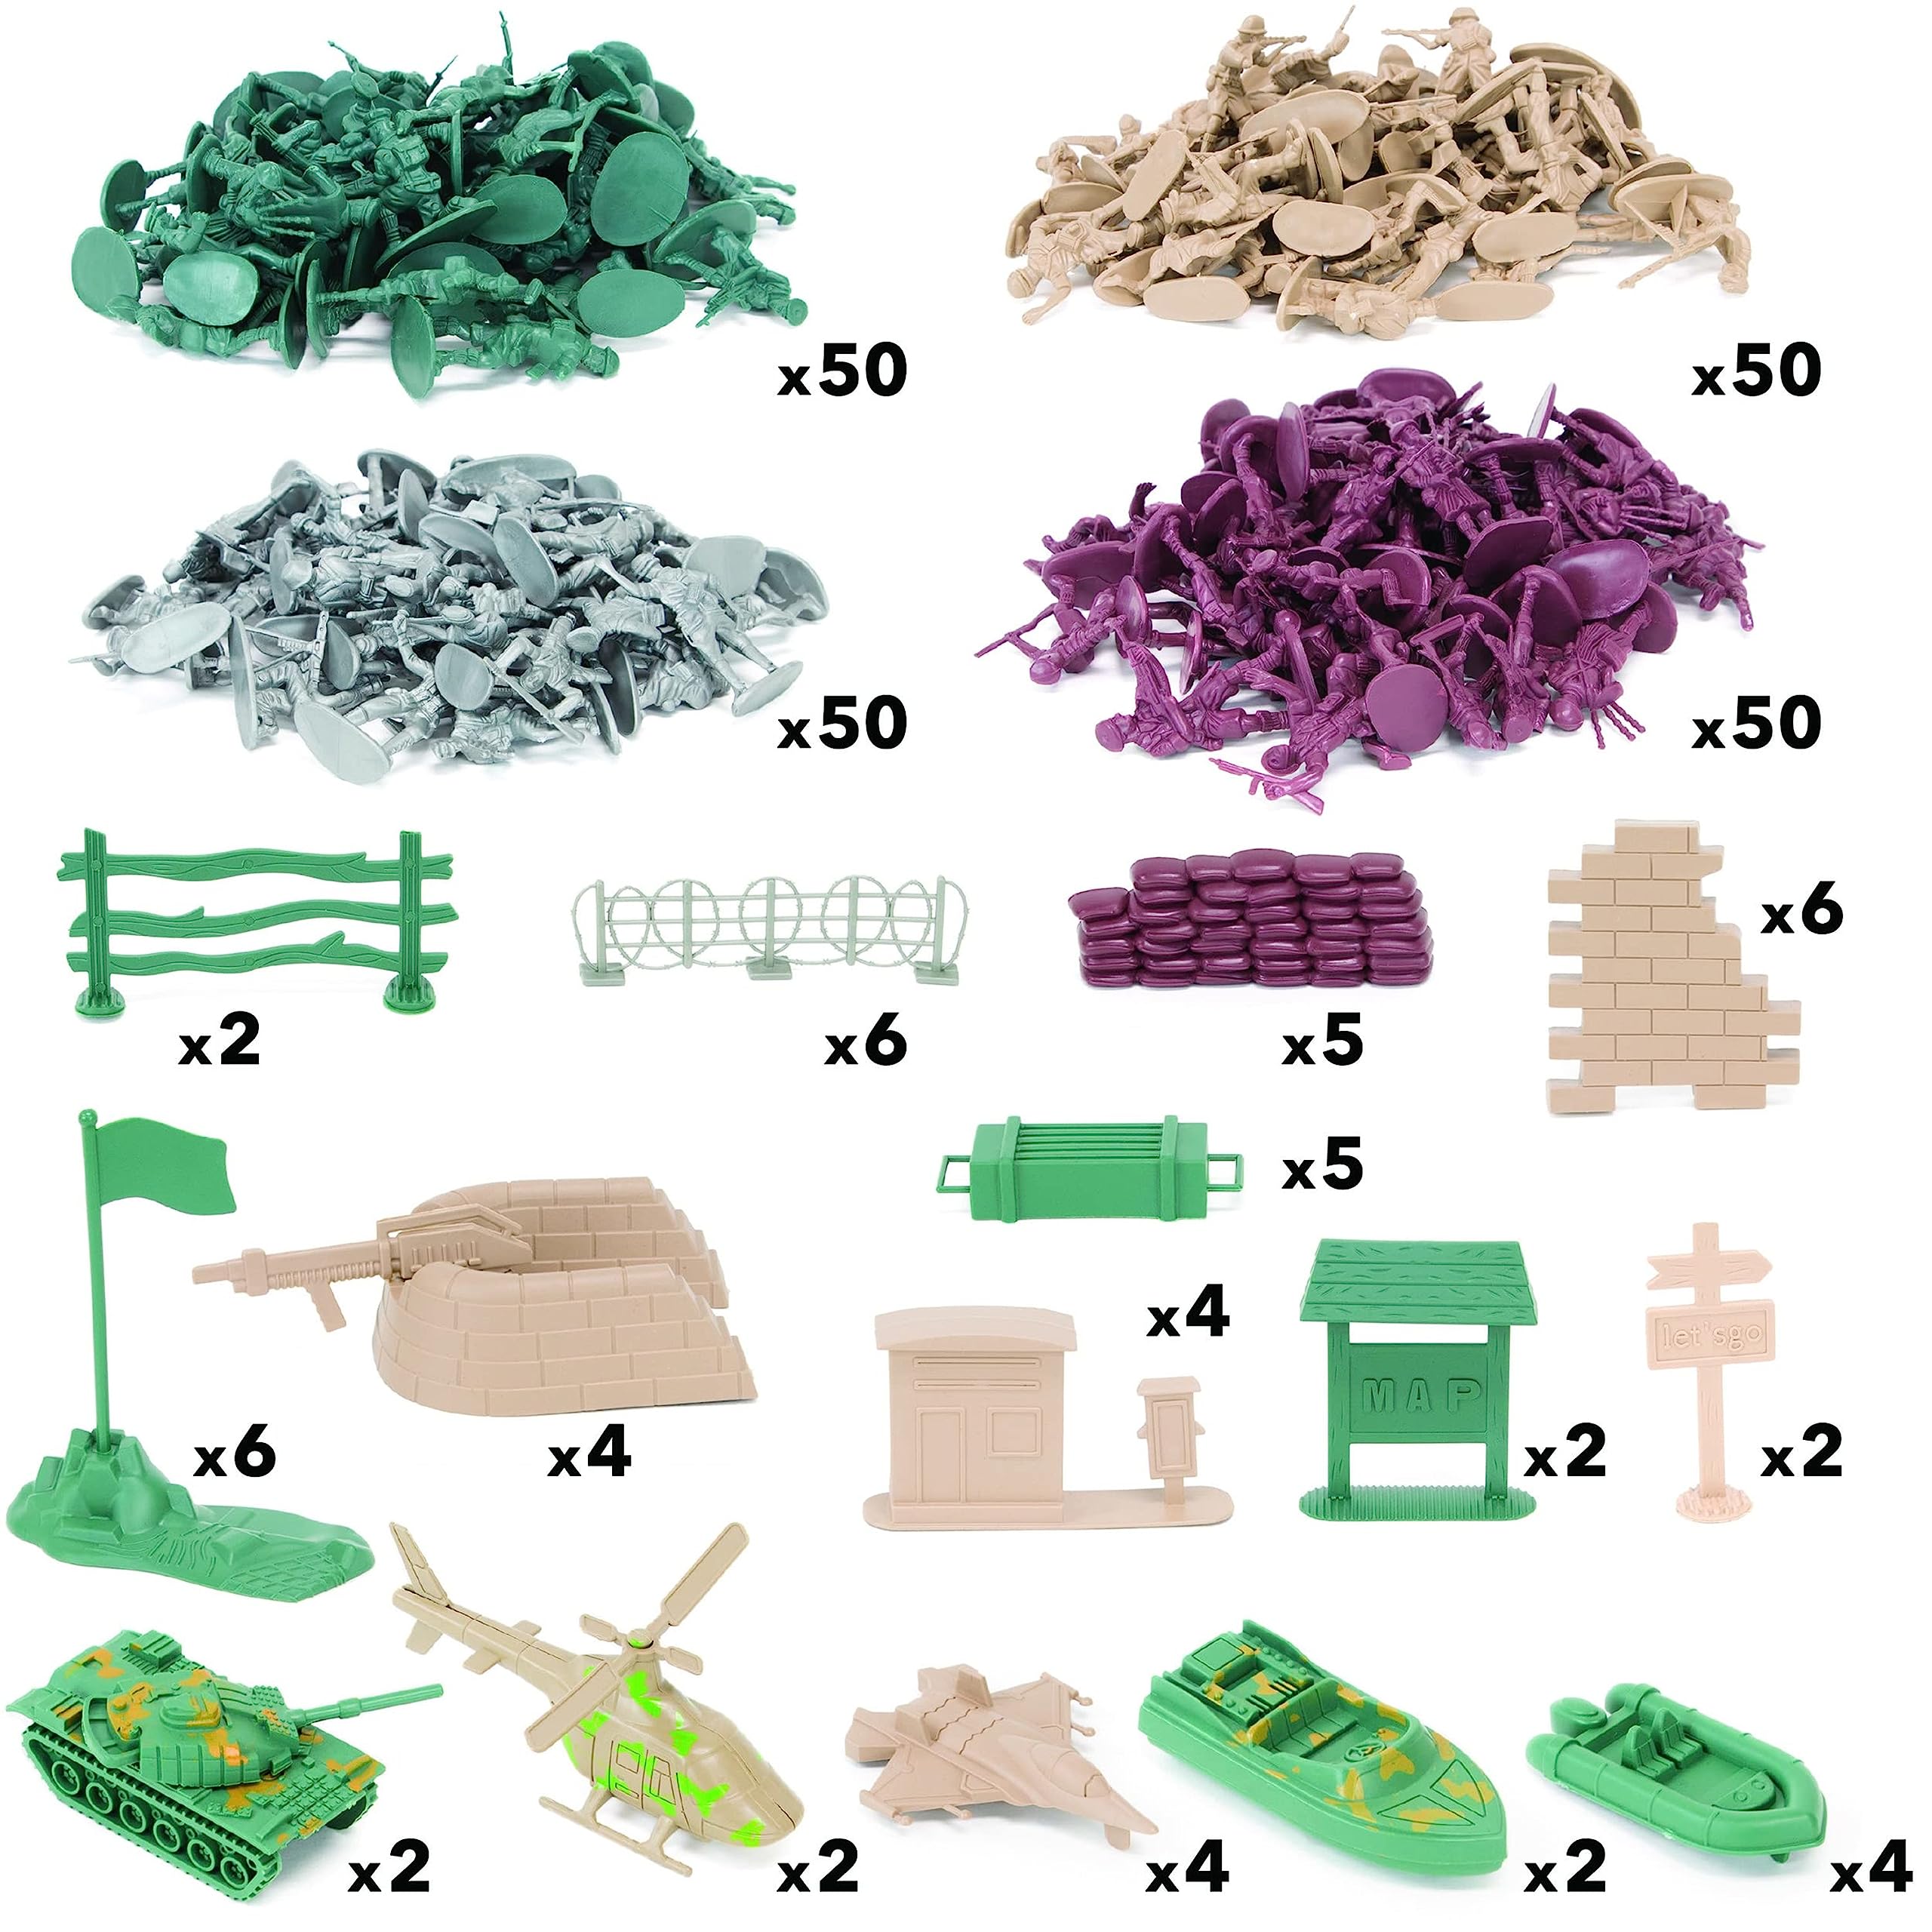 Imagination Generation Army Men Big Battle Playset Deluxe Army Toys and Green Army Men - Set Includes Tan and Green Army Men, Tanks, Jets, Walls, Helis, Battlefield Mat and More (260 pcs)